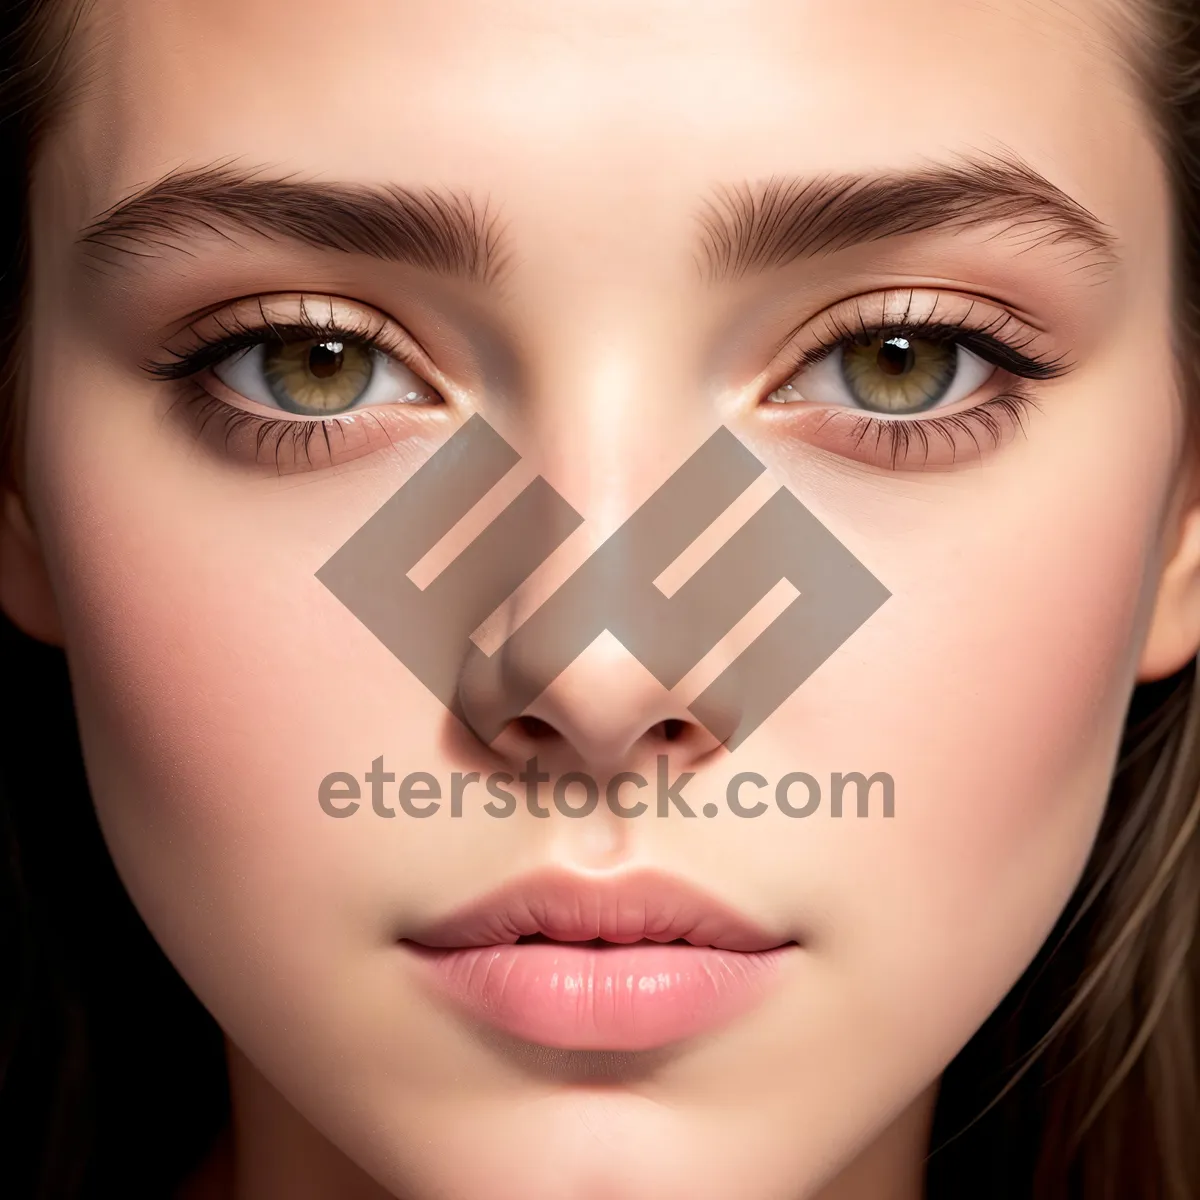 Picture of Gorgeous Beauty: Closeup of Attractive Model's Flawless Skin and Seductive Eyes